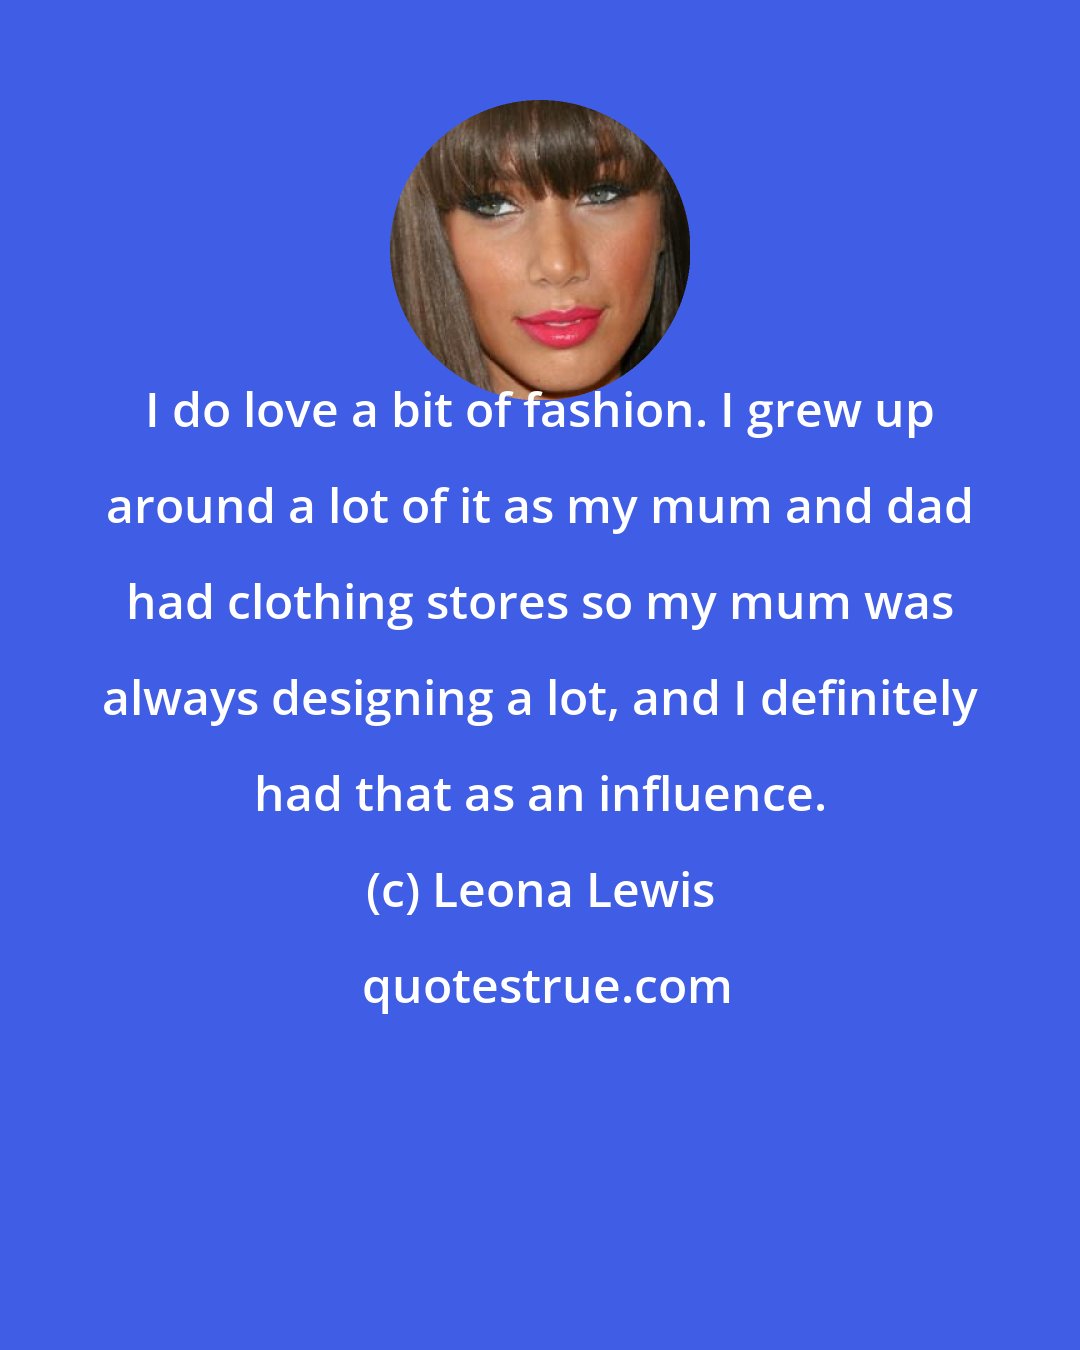 Leona Lewis: I do love a bit of fashion. I grew up around a lot of it as my mum and dad had clothing stores so my mum was always designing a lot, and I definitely had that as an influence.